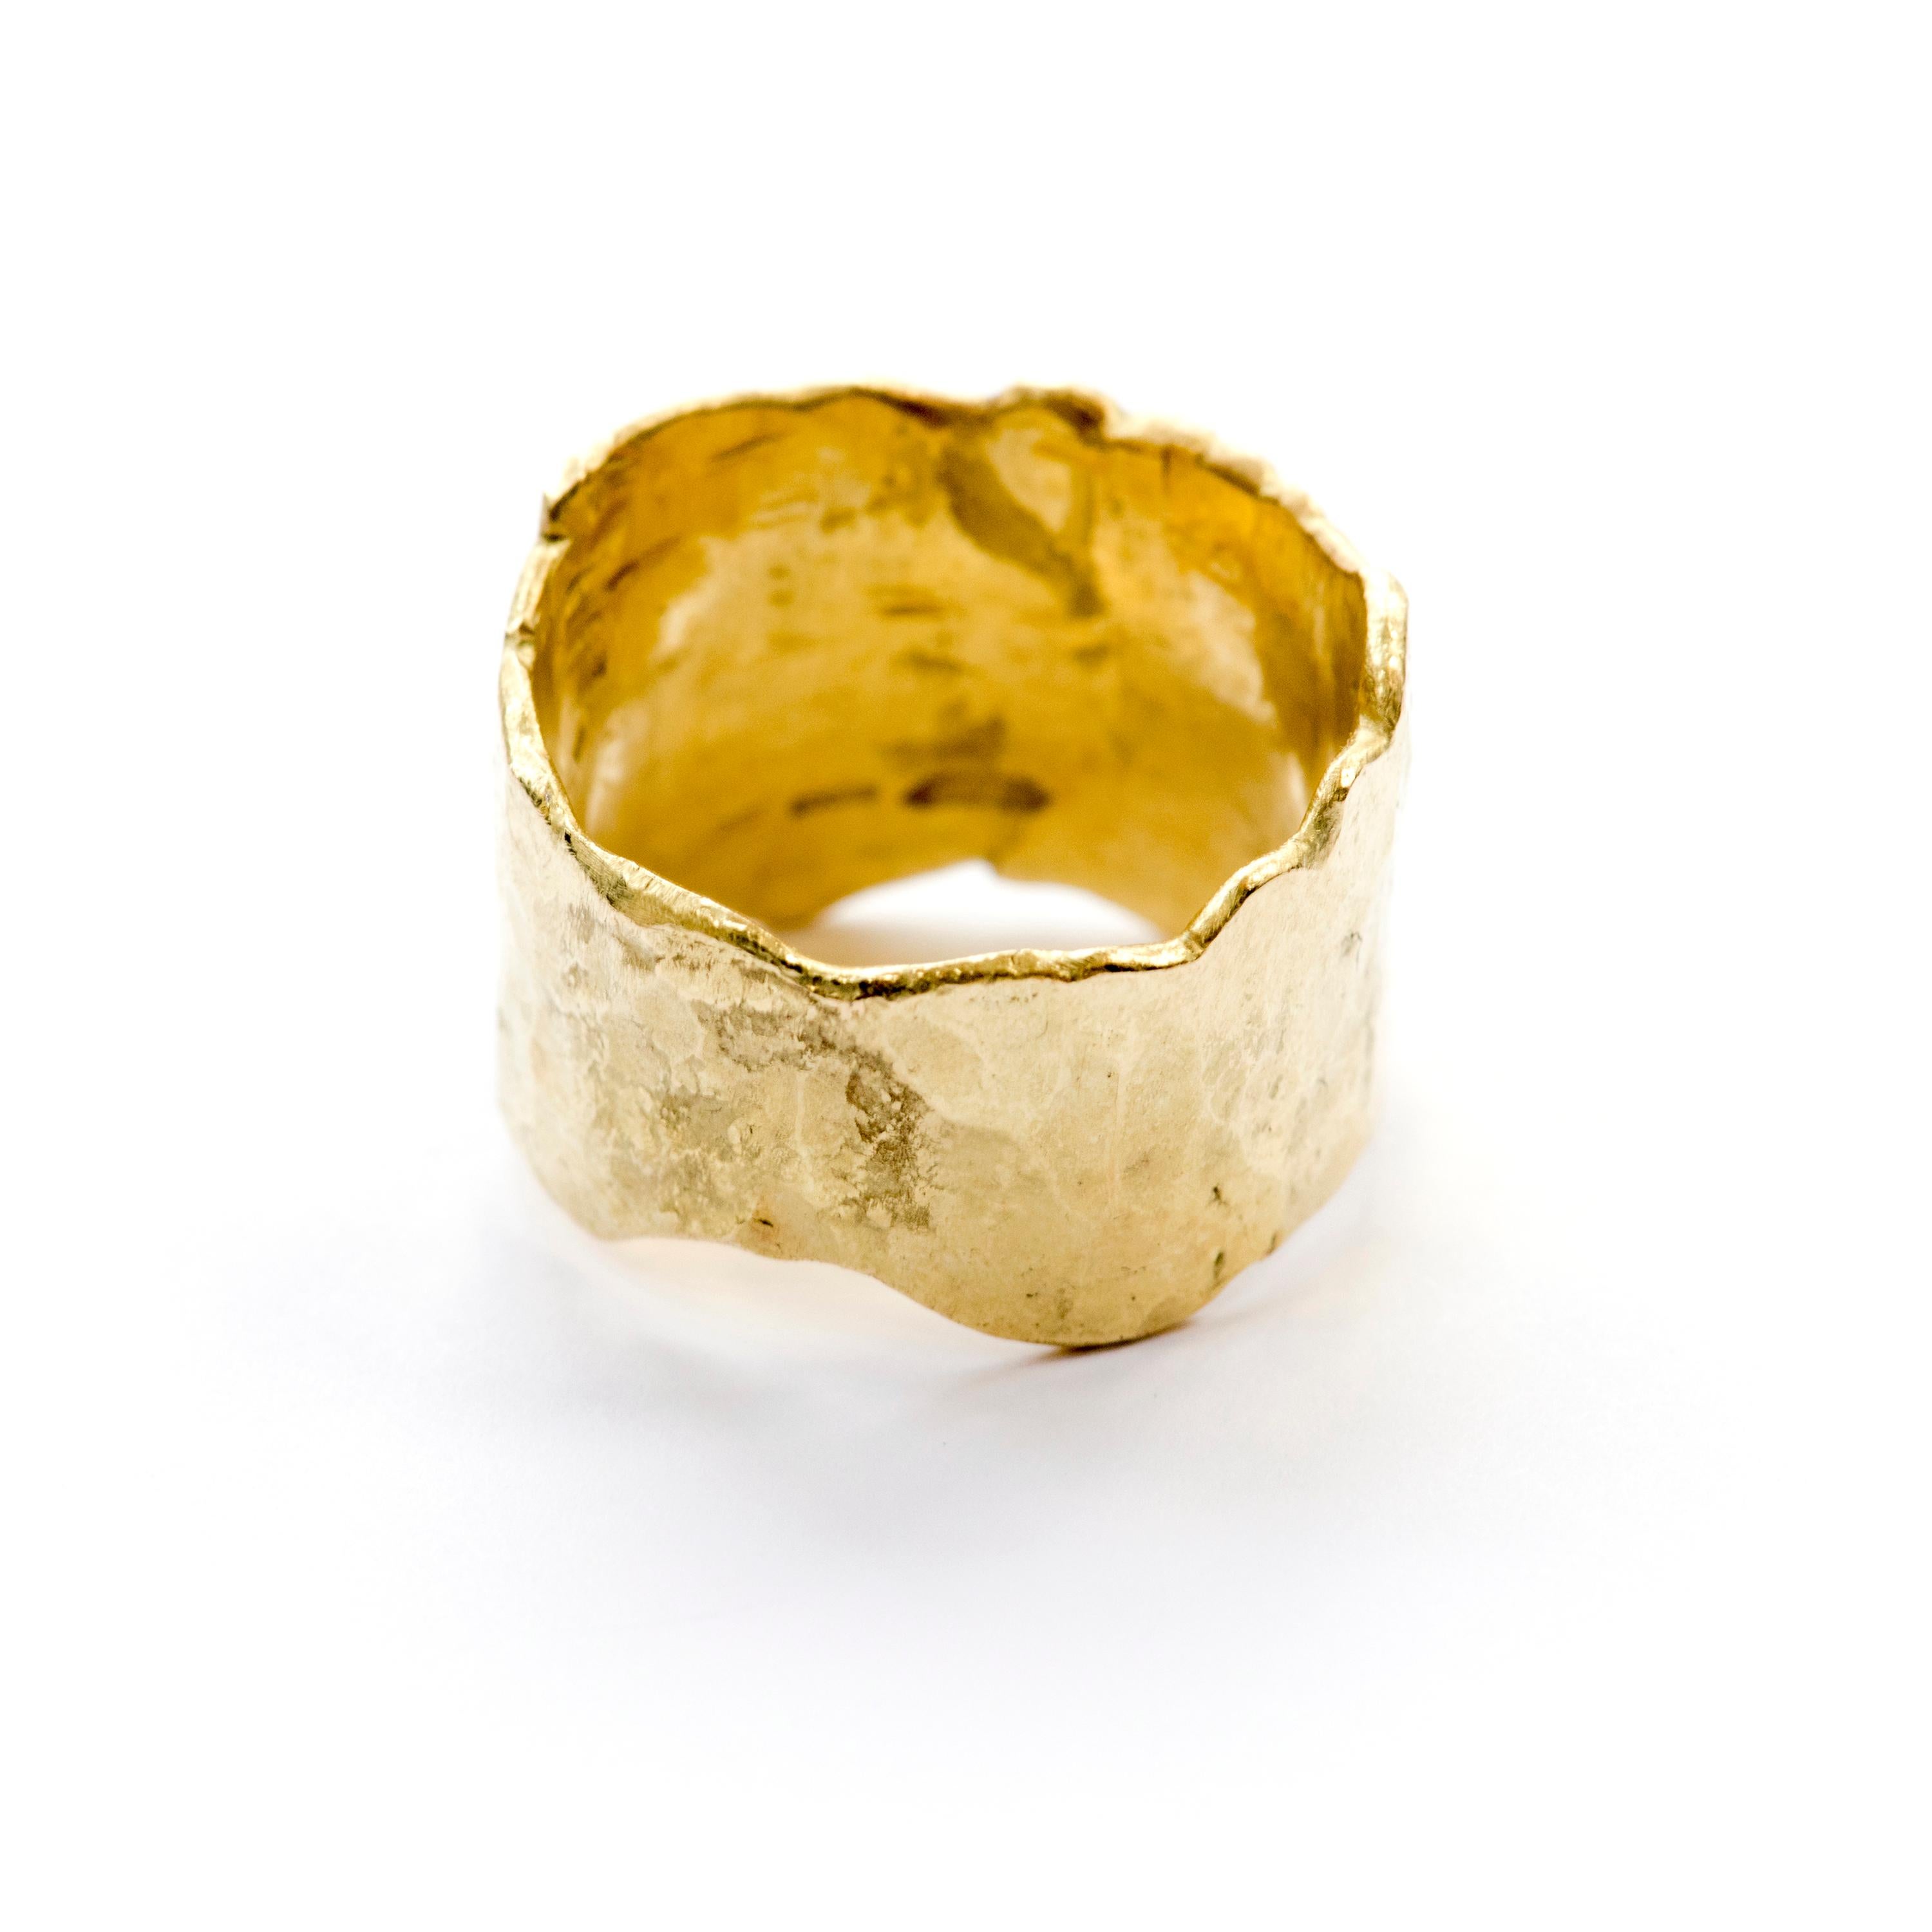 18k Gold textured wide ring. This ring is 15mm wide at its widest point and 9mm wide at the base to allow for comfort. Made using reticulation and forging techniques it is a stunning statement ring showcasing the 18k yellow gold in all its glory.